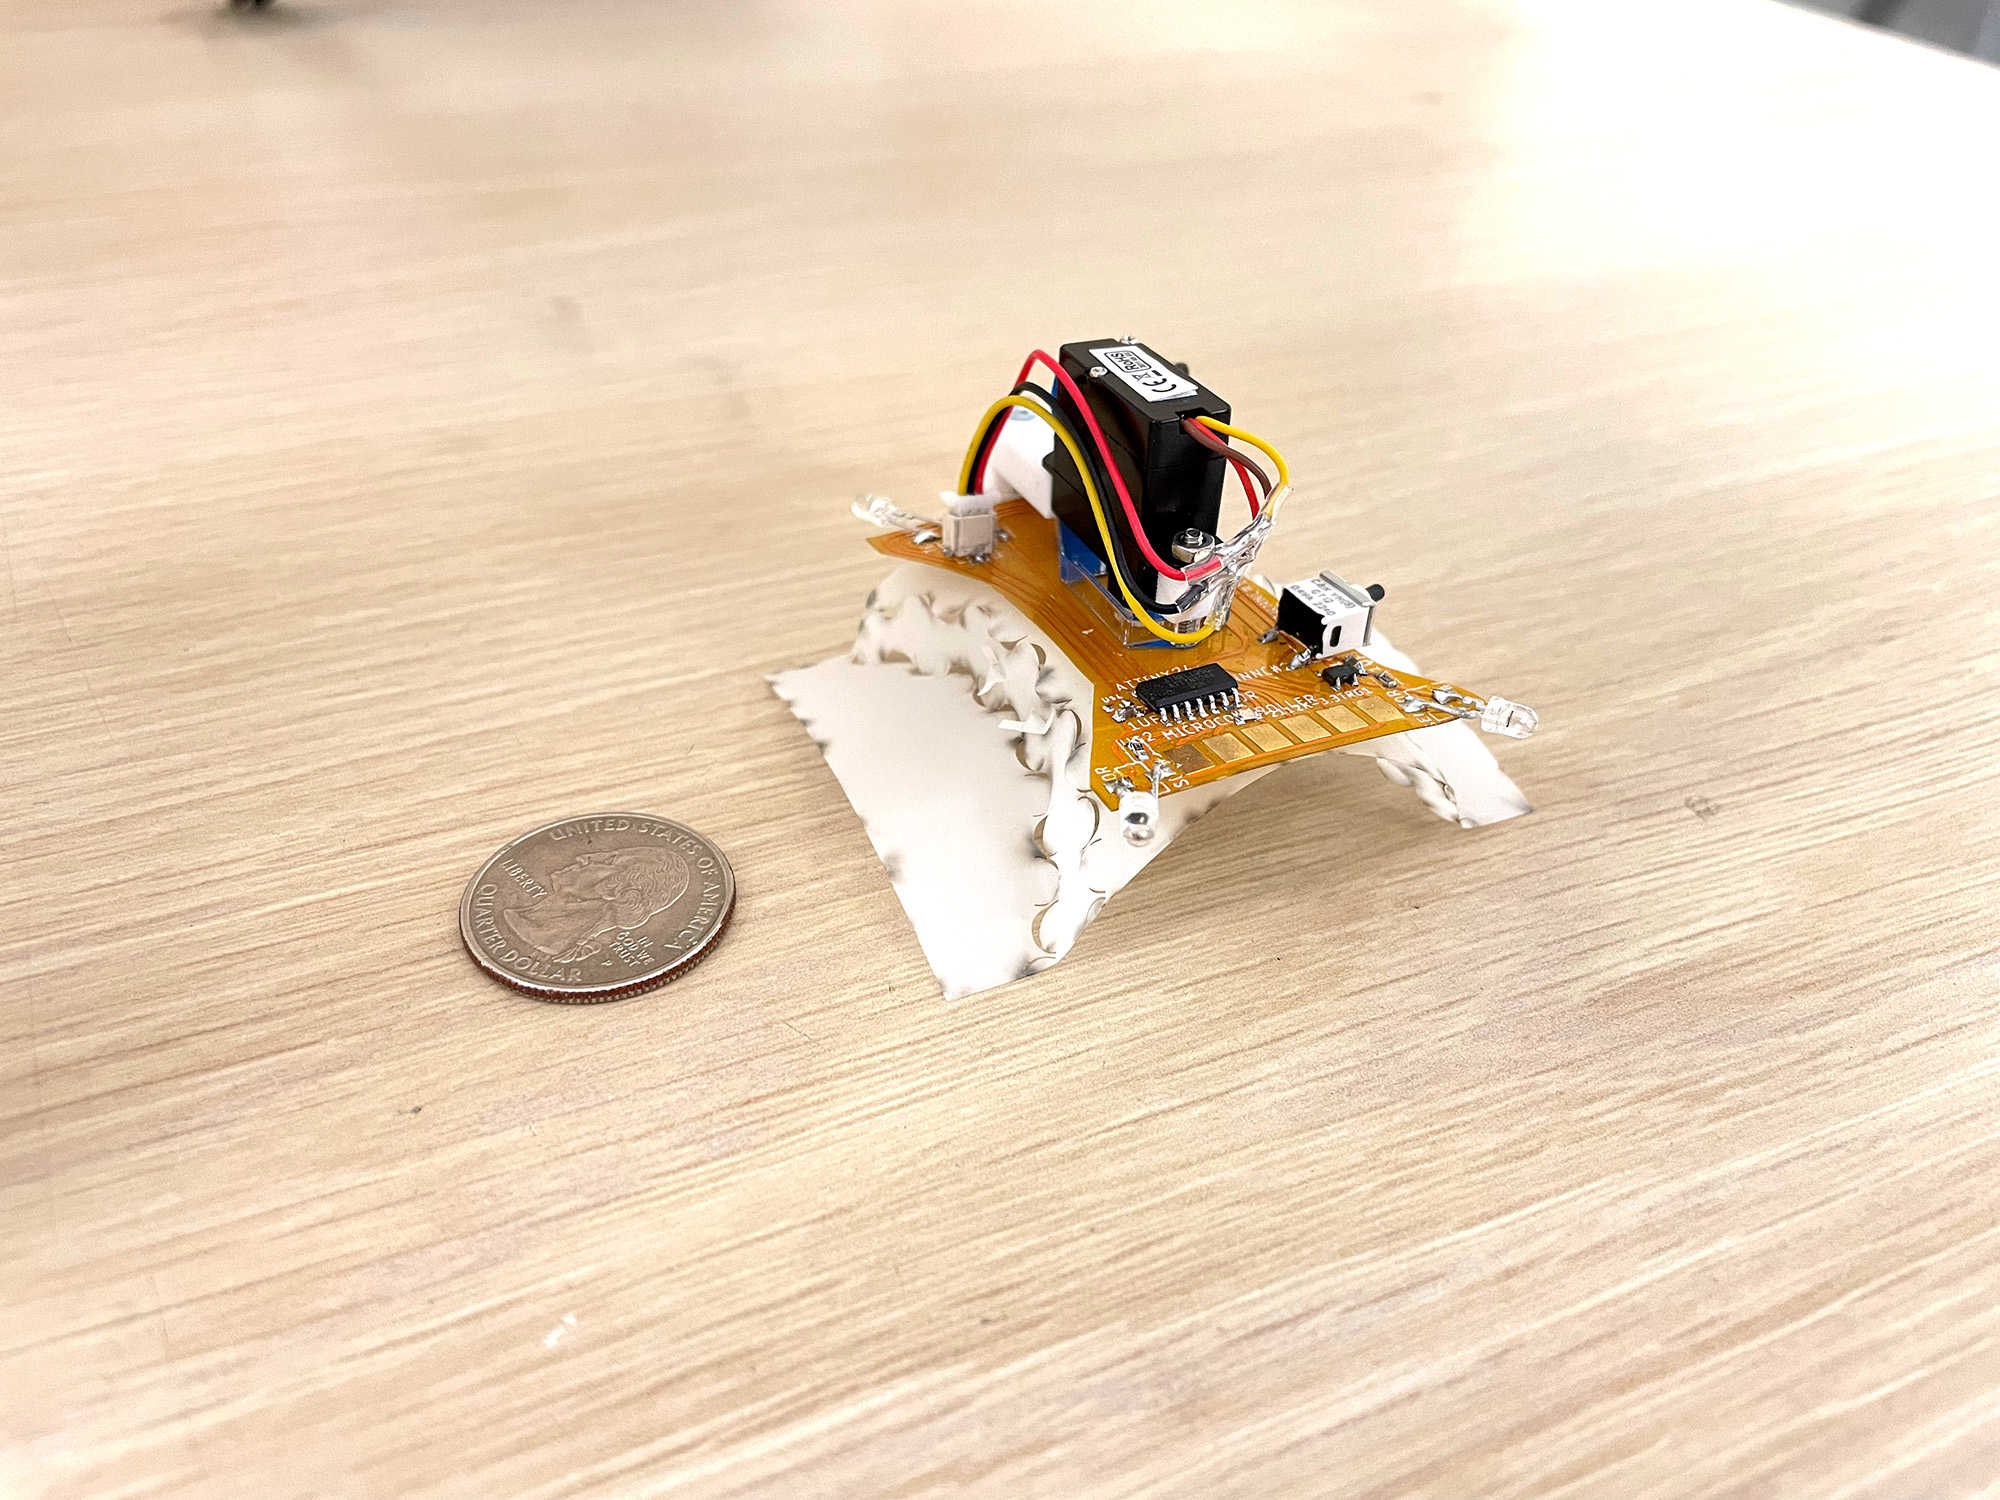 A centimeter-scale quadruped robot sitting on a desk next to a a quarter for scale